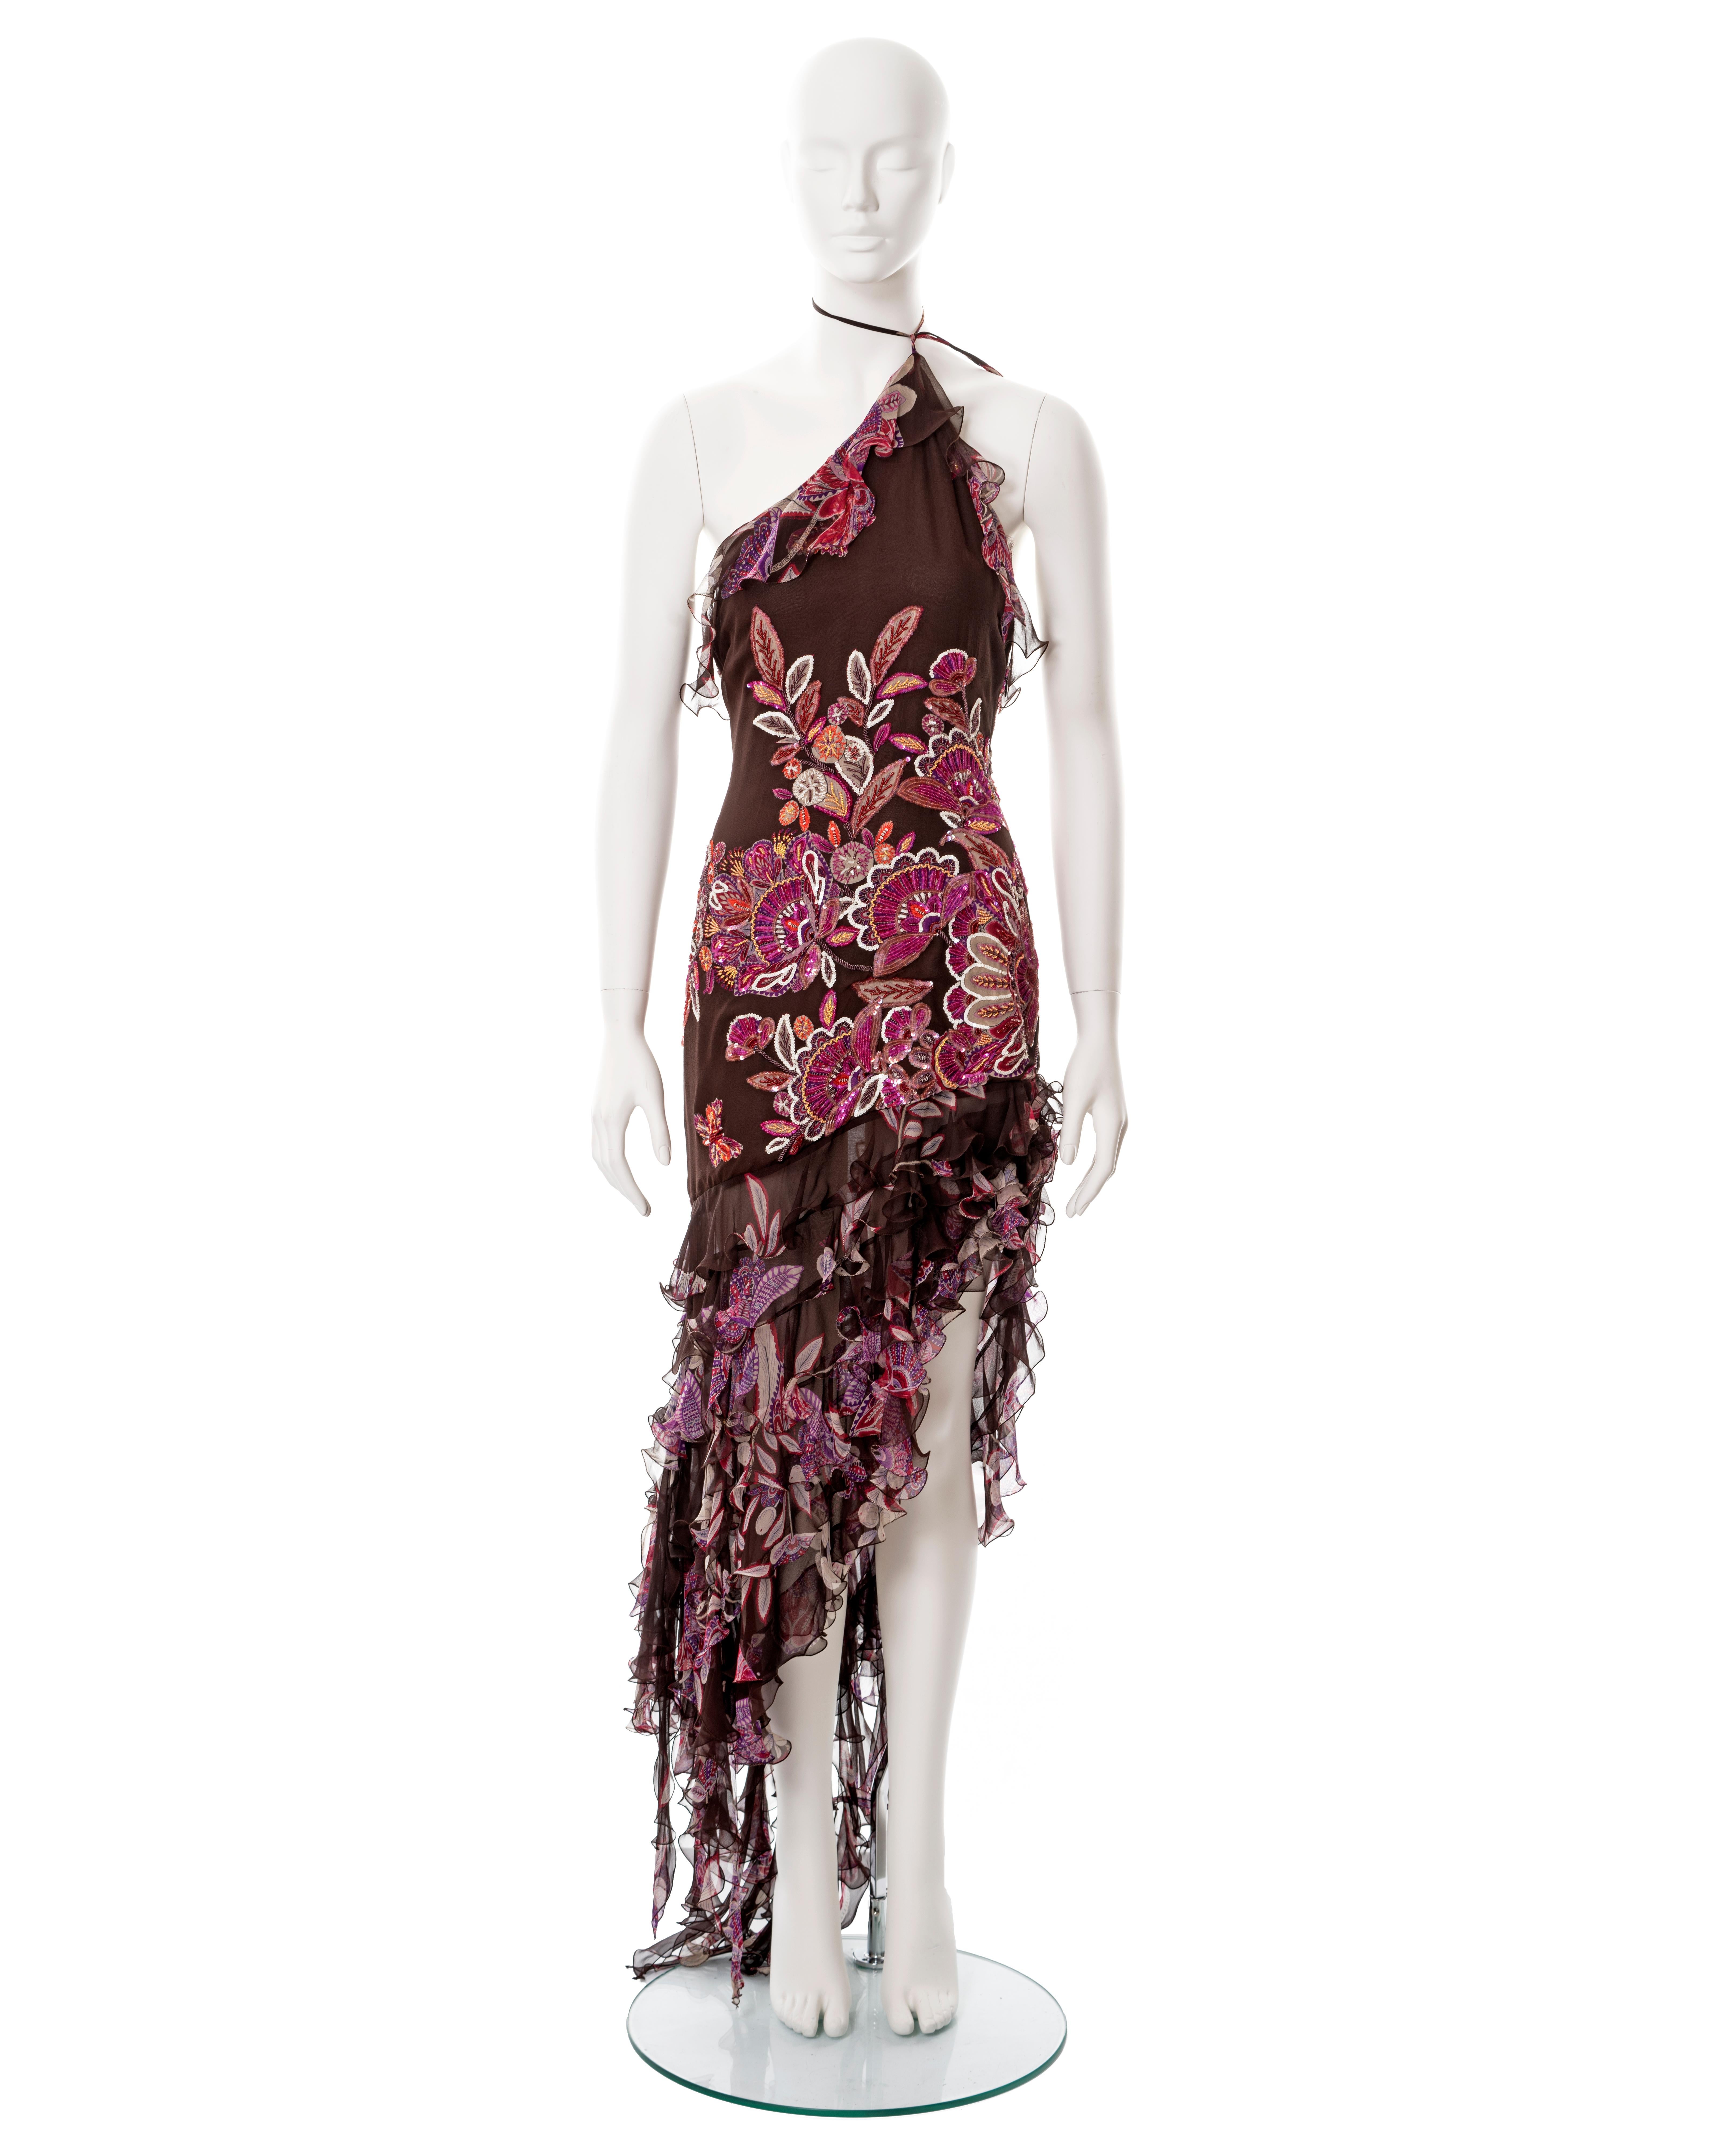 ▪ Emanuel Ungaro burgundy silk halter-neck evening dress
▪ Sold by One of a Kind Archive
▪ Spring-Summer 2003
▪ Constructed from bias-cut burgundy silk chiffon 
▪ Floral and butterfly motif embellished with beads and sequins 
▪ Ruffled chiffon